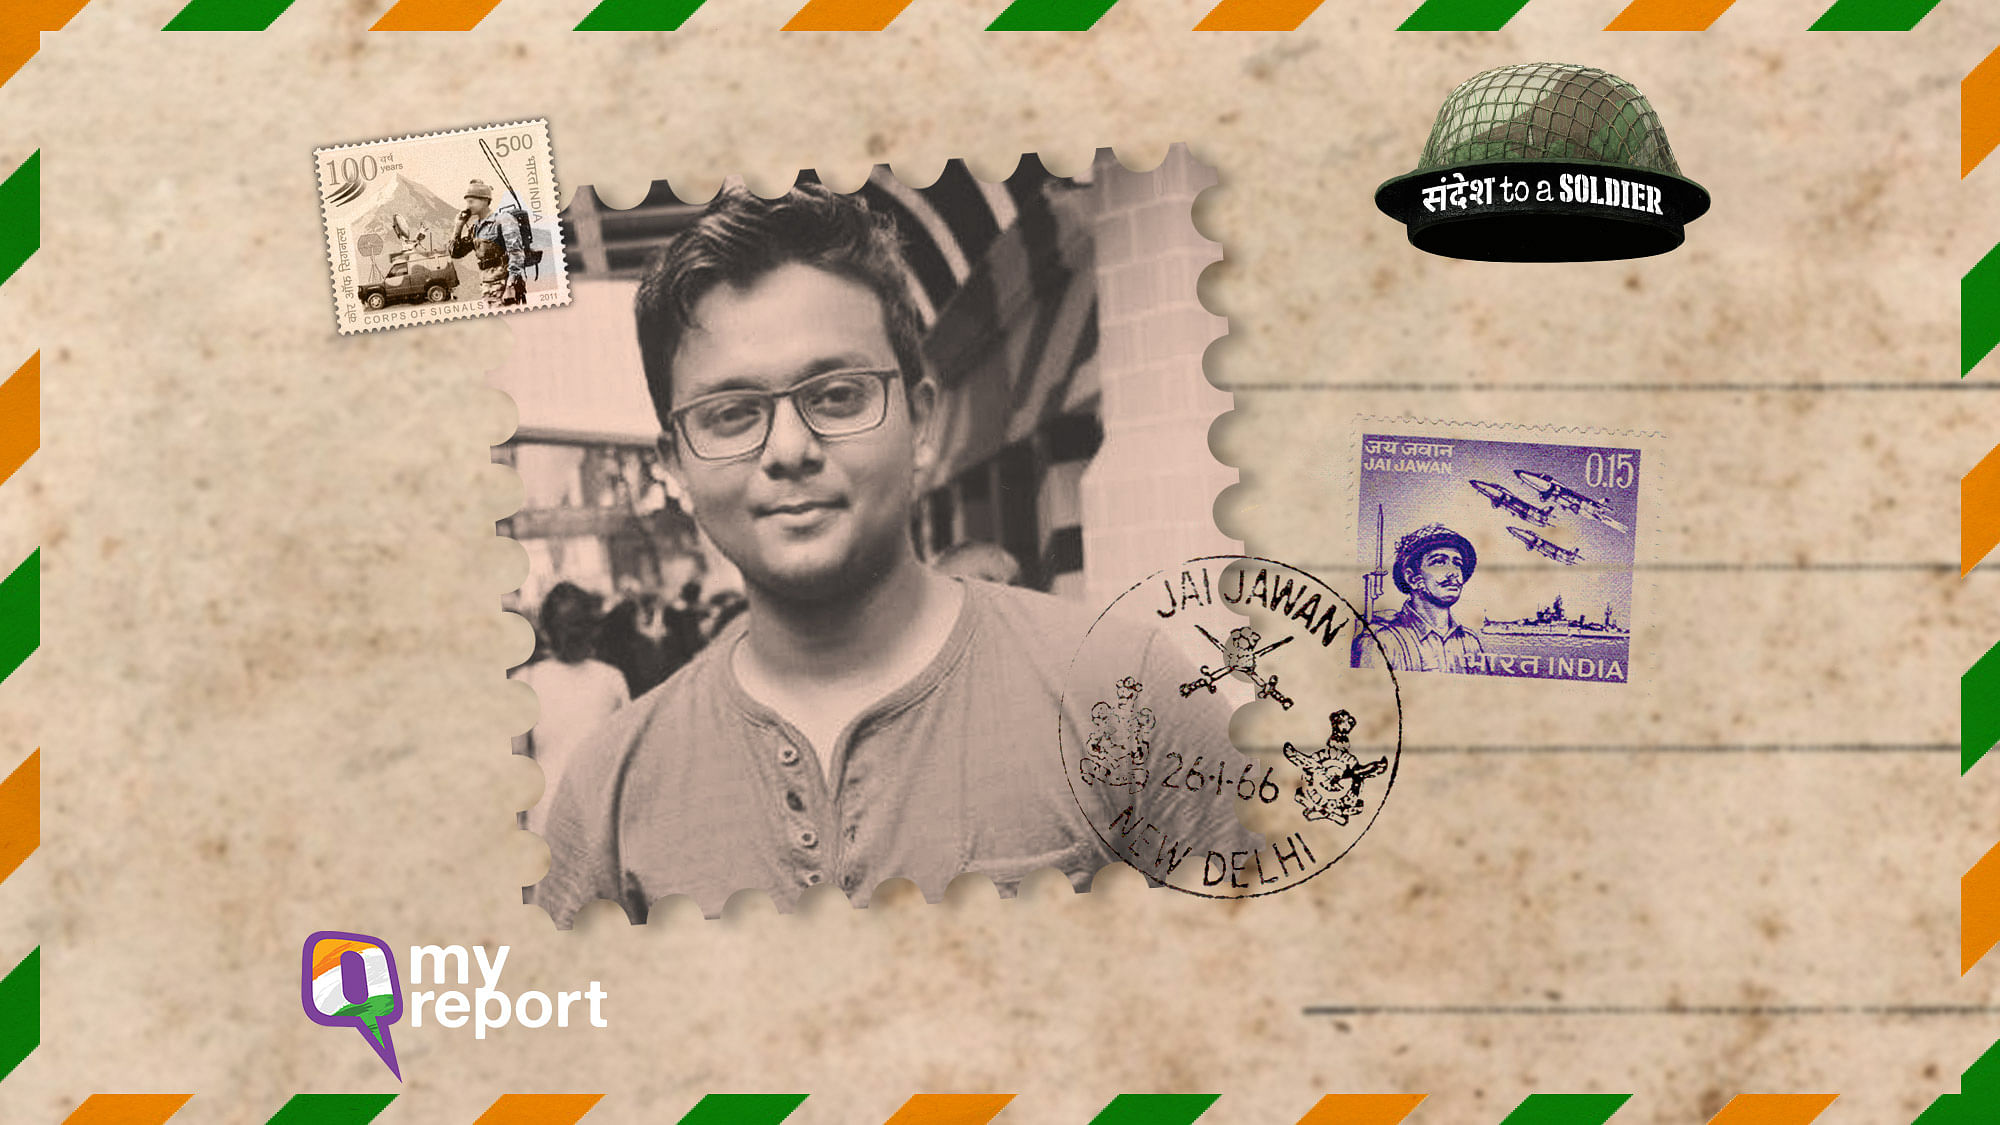 Anuvab sends his ‘Sandesh to a Soldier’ from Kolkata.&nbsp;